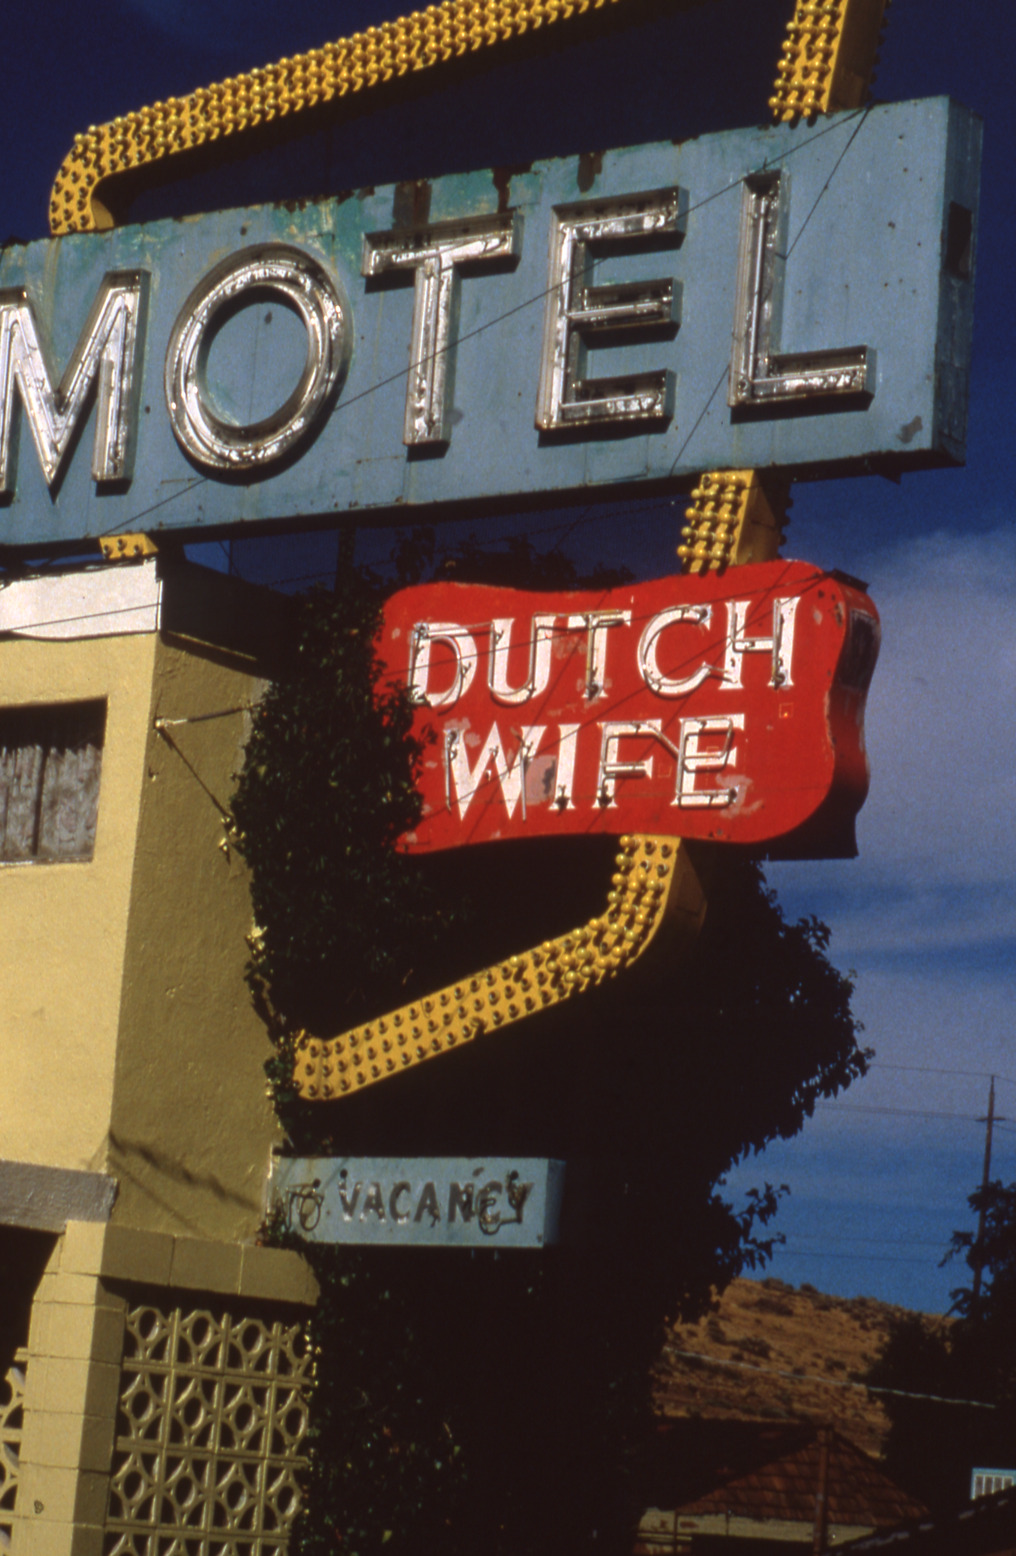 Dutch Wife Motel roof mounted sign, Reno, Nevada: photographic print